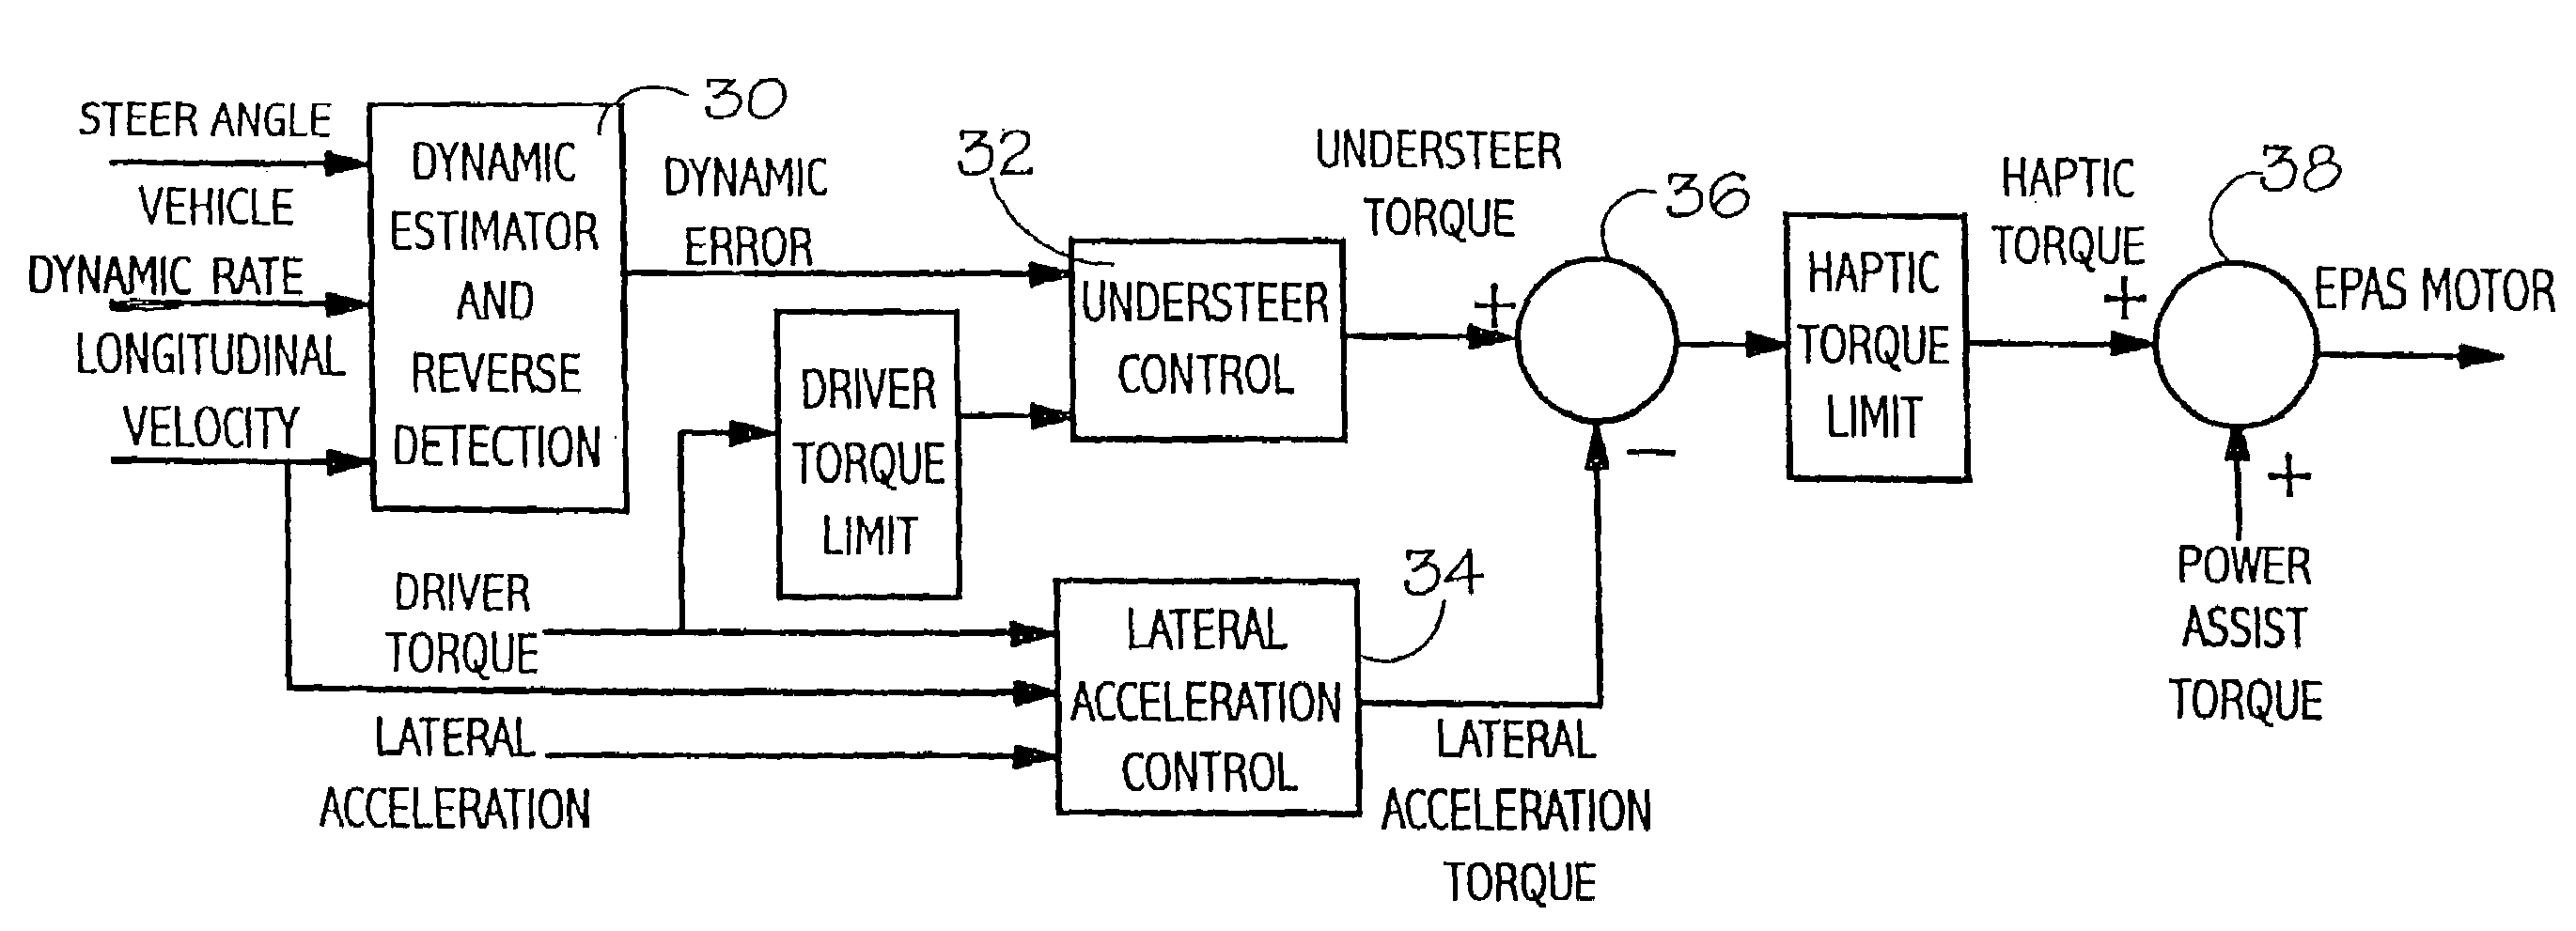 Haptic controller for road vehicles